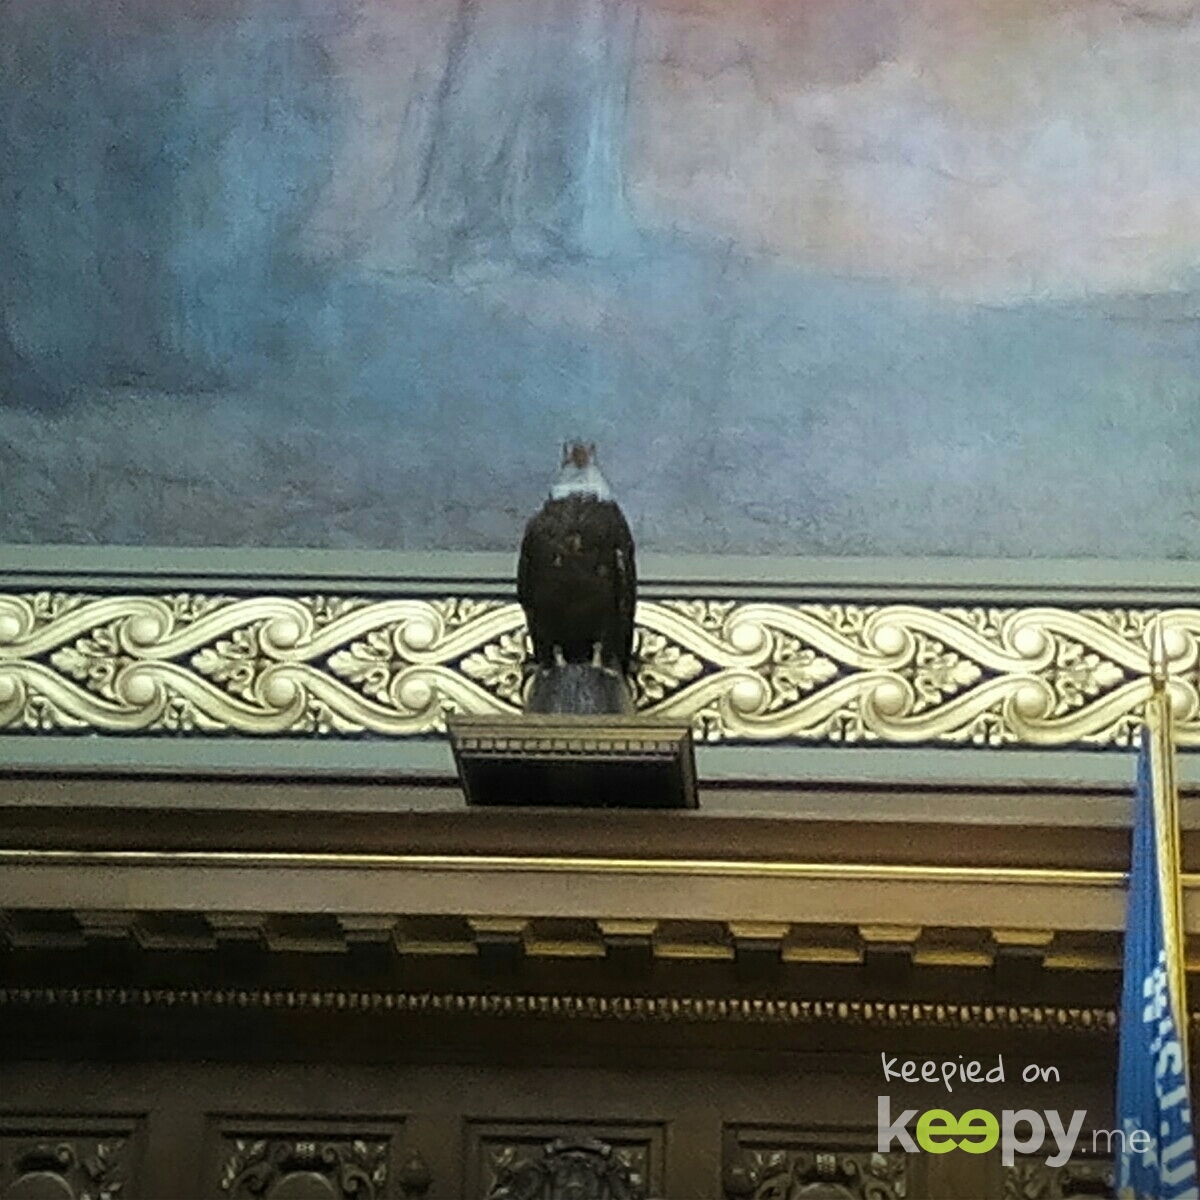 At the State Capitol » Keepy.me